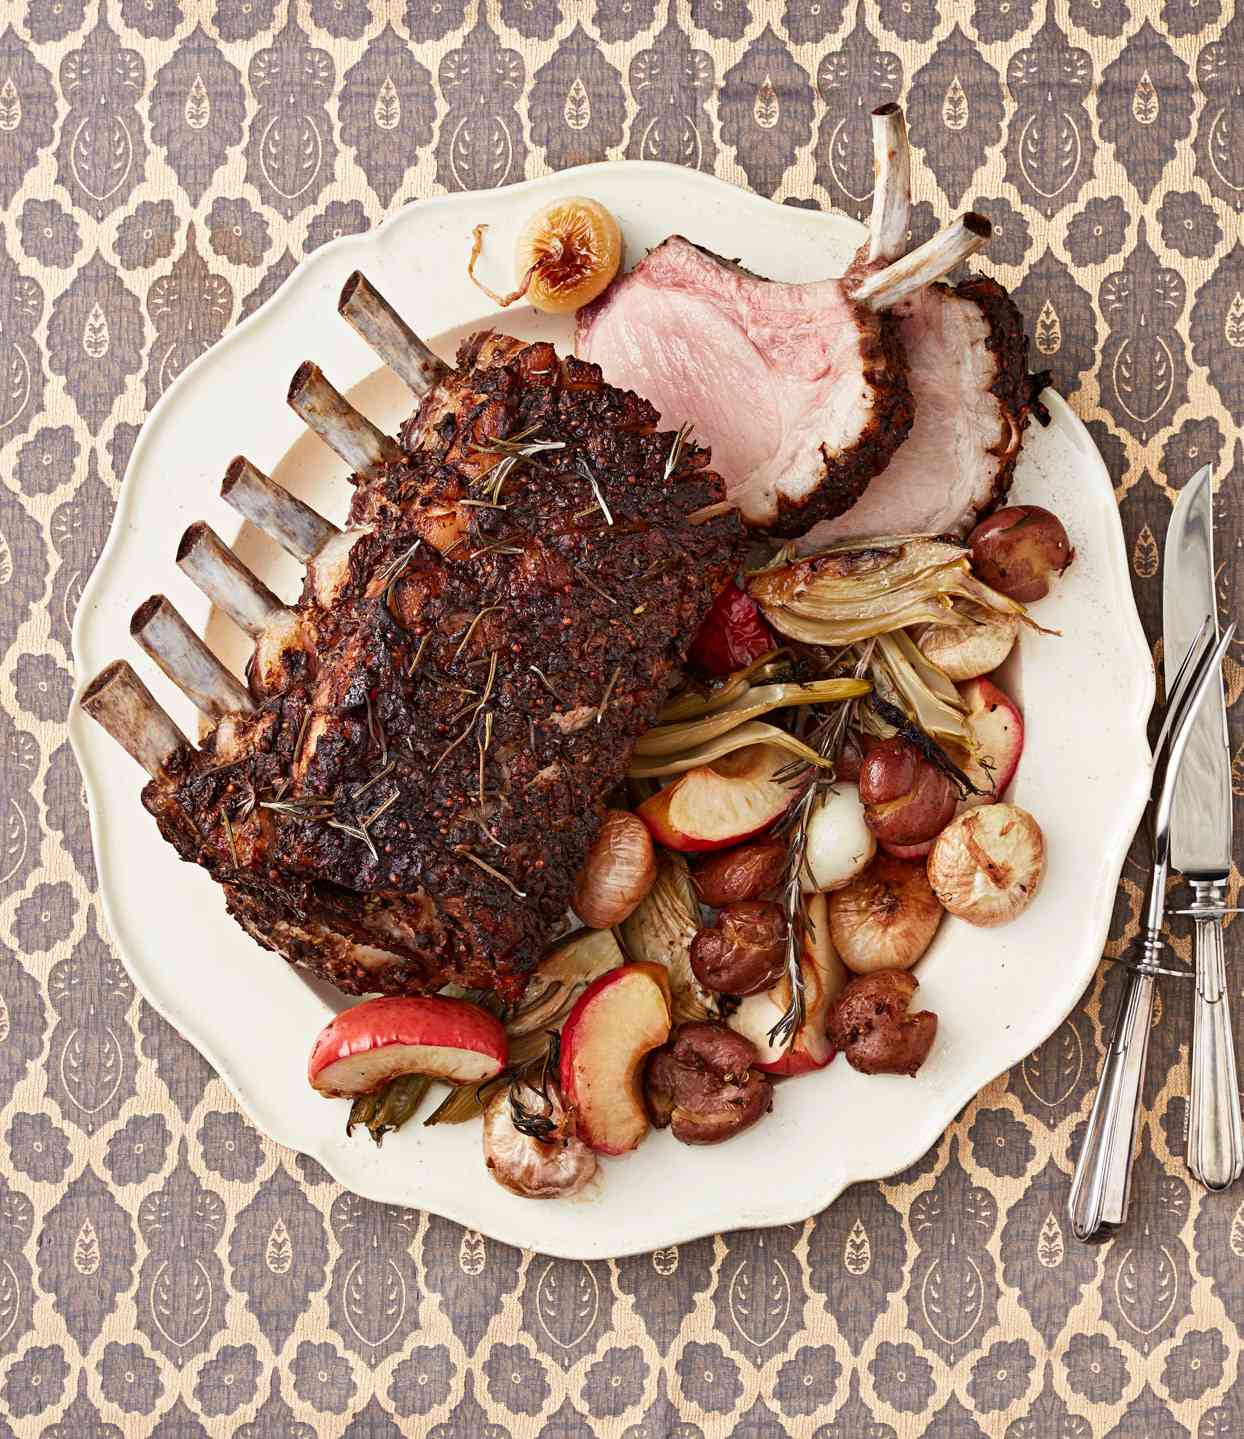 Pork Rib Roast with Apples, Fennel, and Potatoes